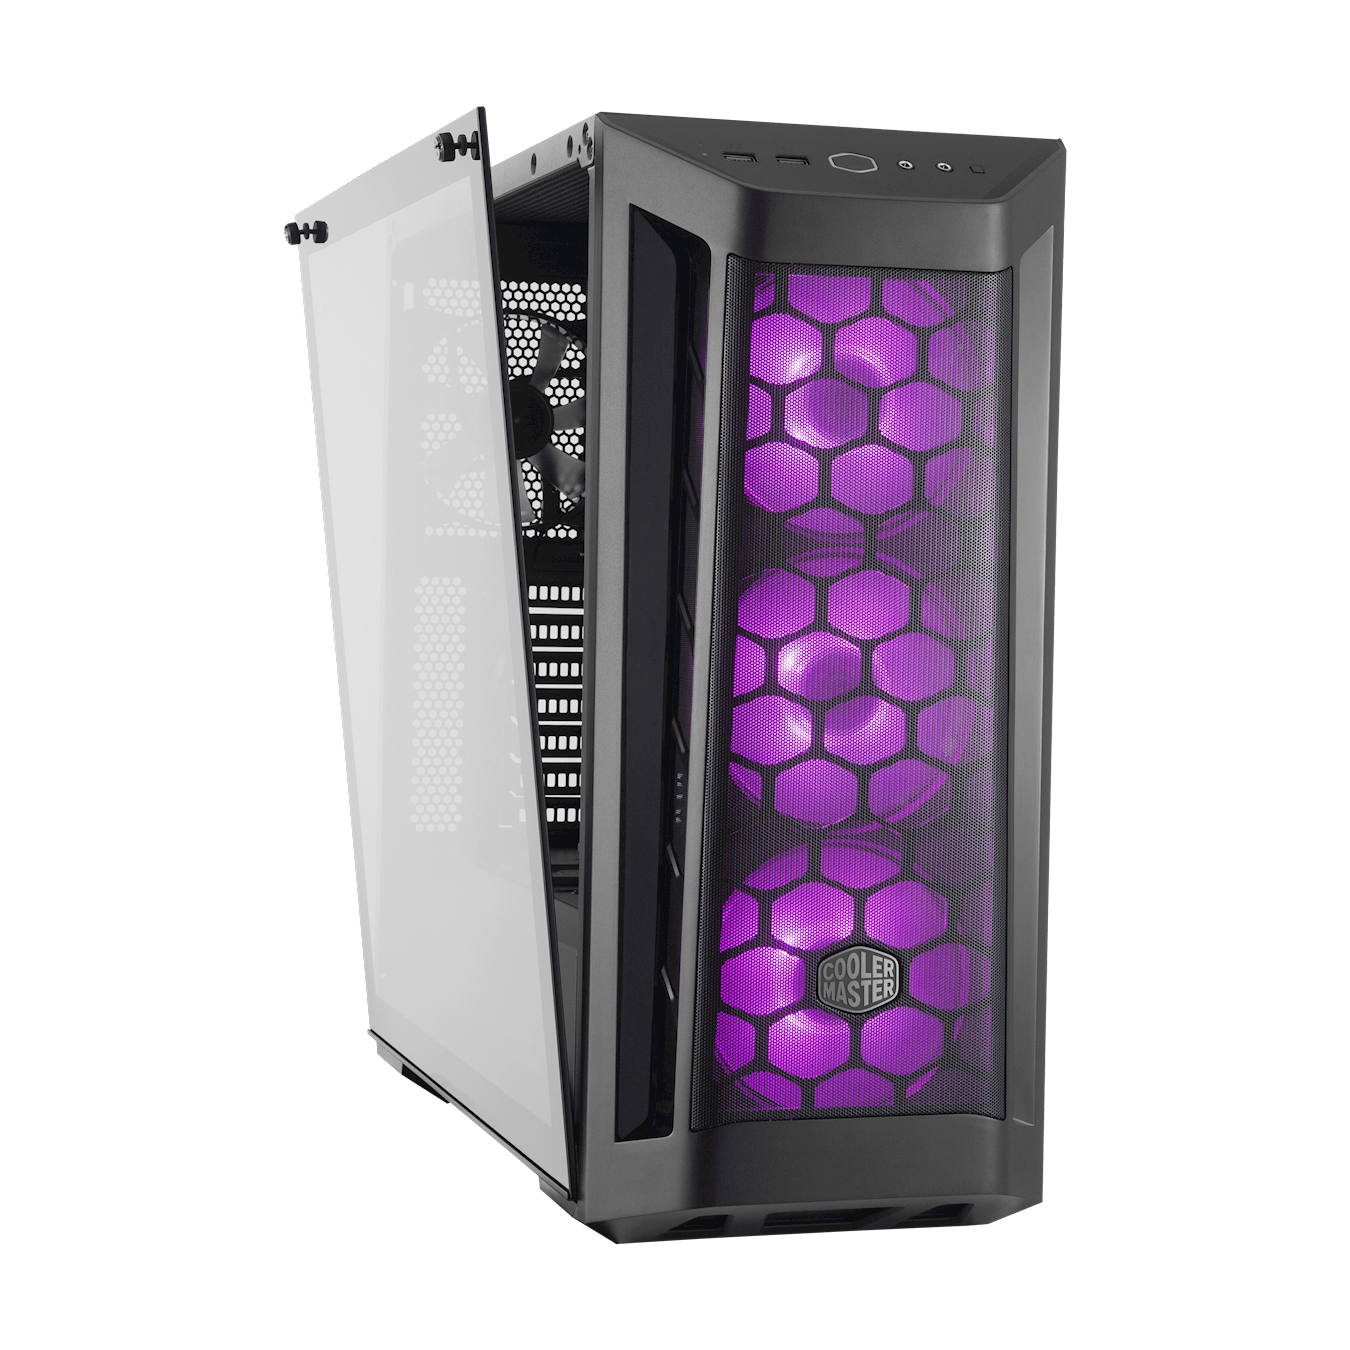 coolermaster-masterbox-mb511-rgb-cabinet-sms-technology